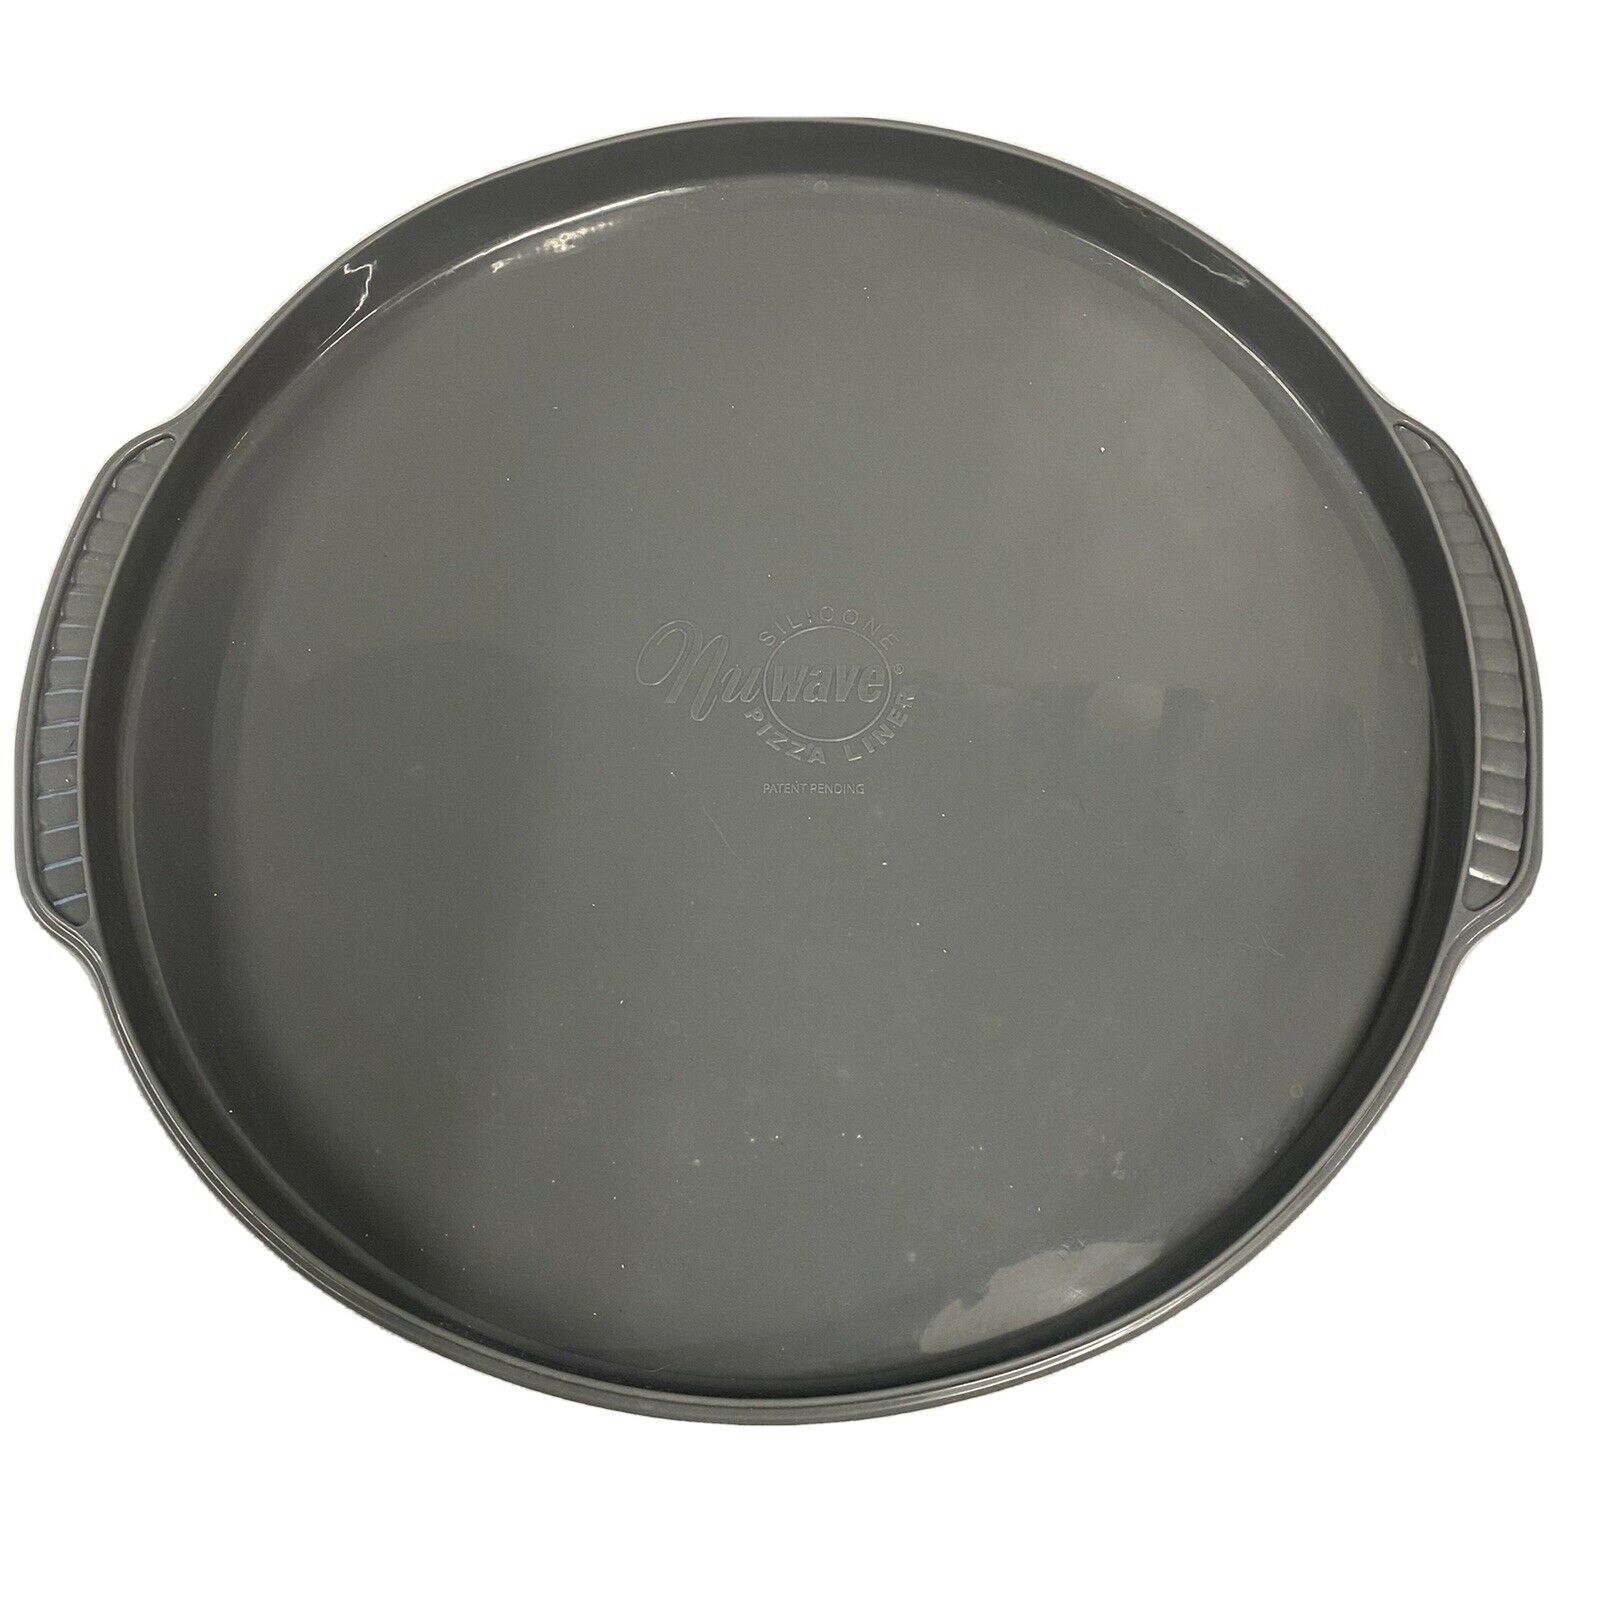 Nuwave Pro Infrared Oven Pizza Silicone Liner Tray Pan Gray 11.5" Genuine - $16.26